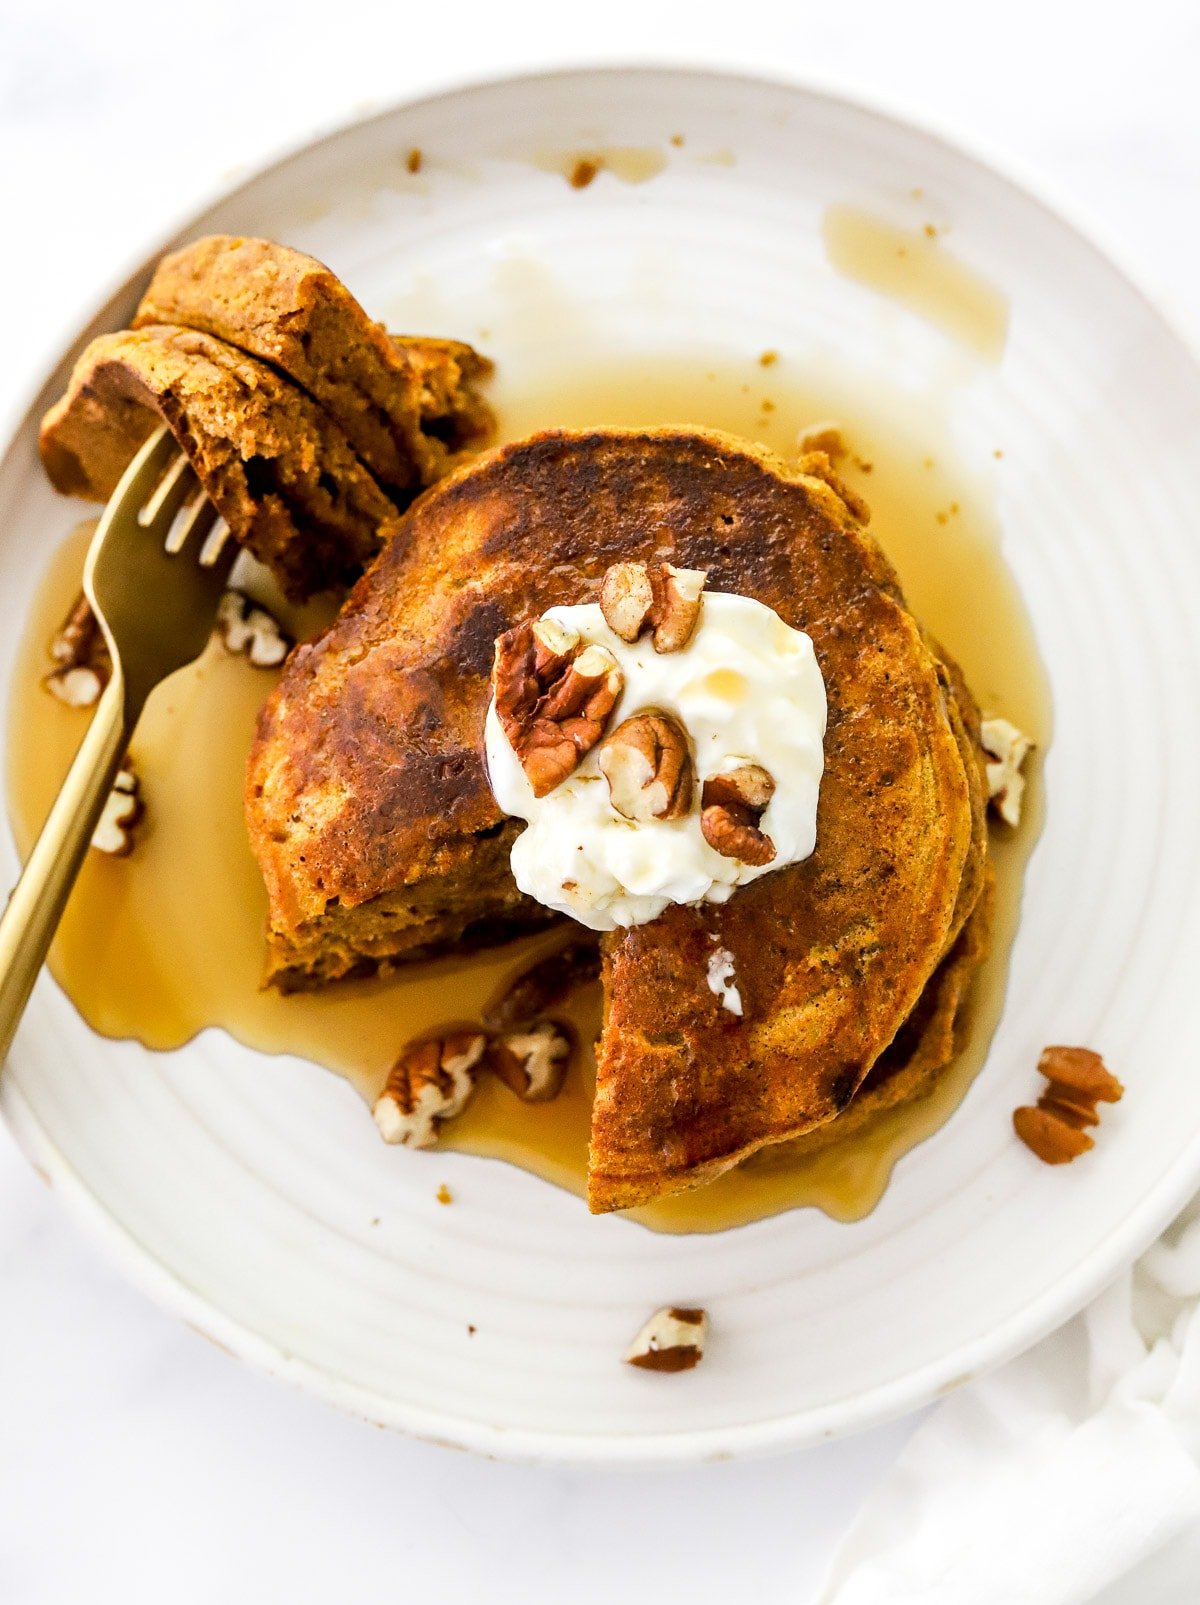 Looking down at a stack of healthy pumpkin pancakes with a bite on a fork and maple syrup, pecans and yogurt topping.